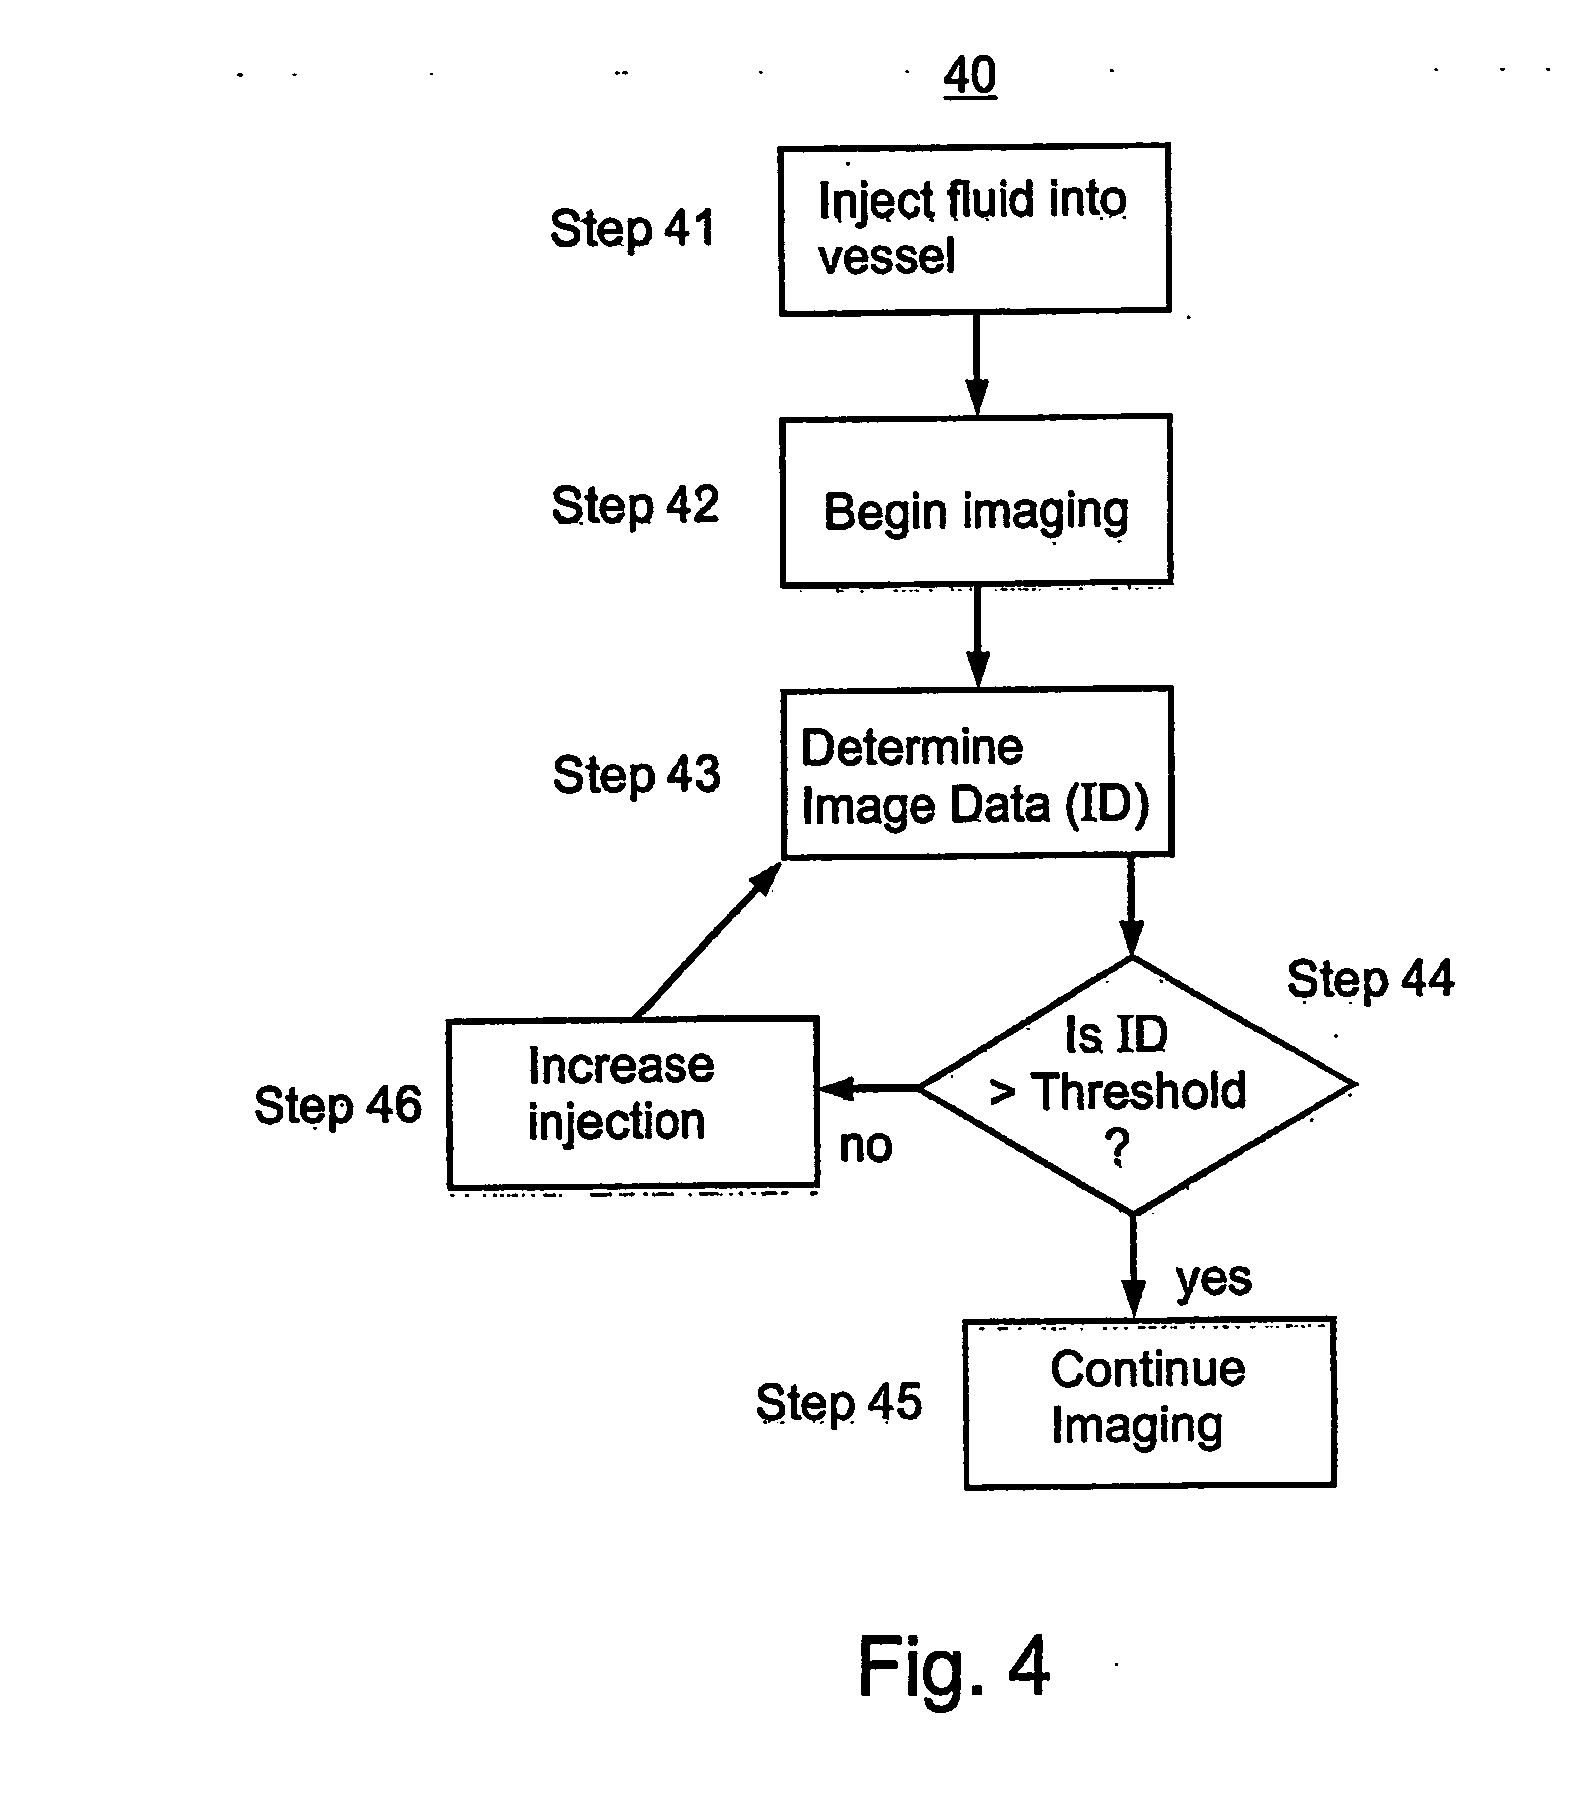 Apparatus, method and system for intravascular photographic imaging